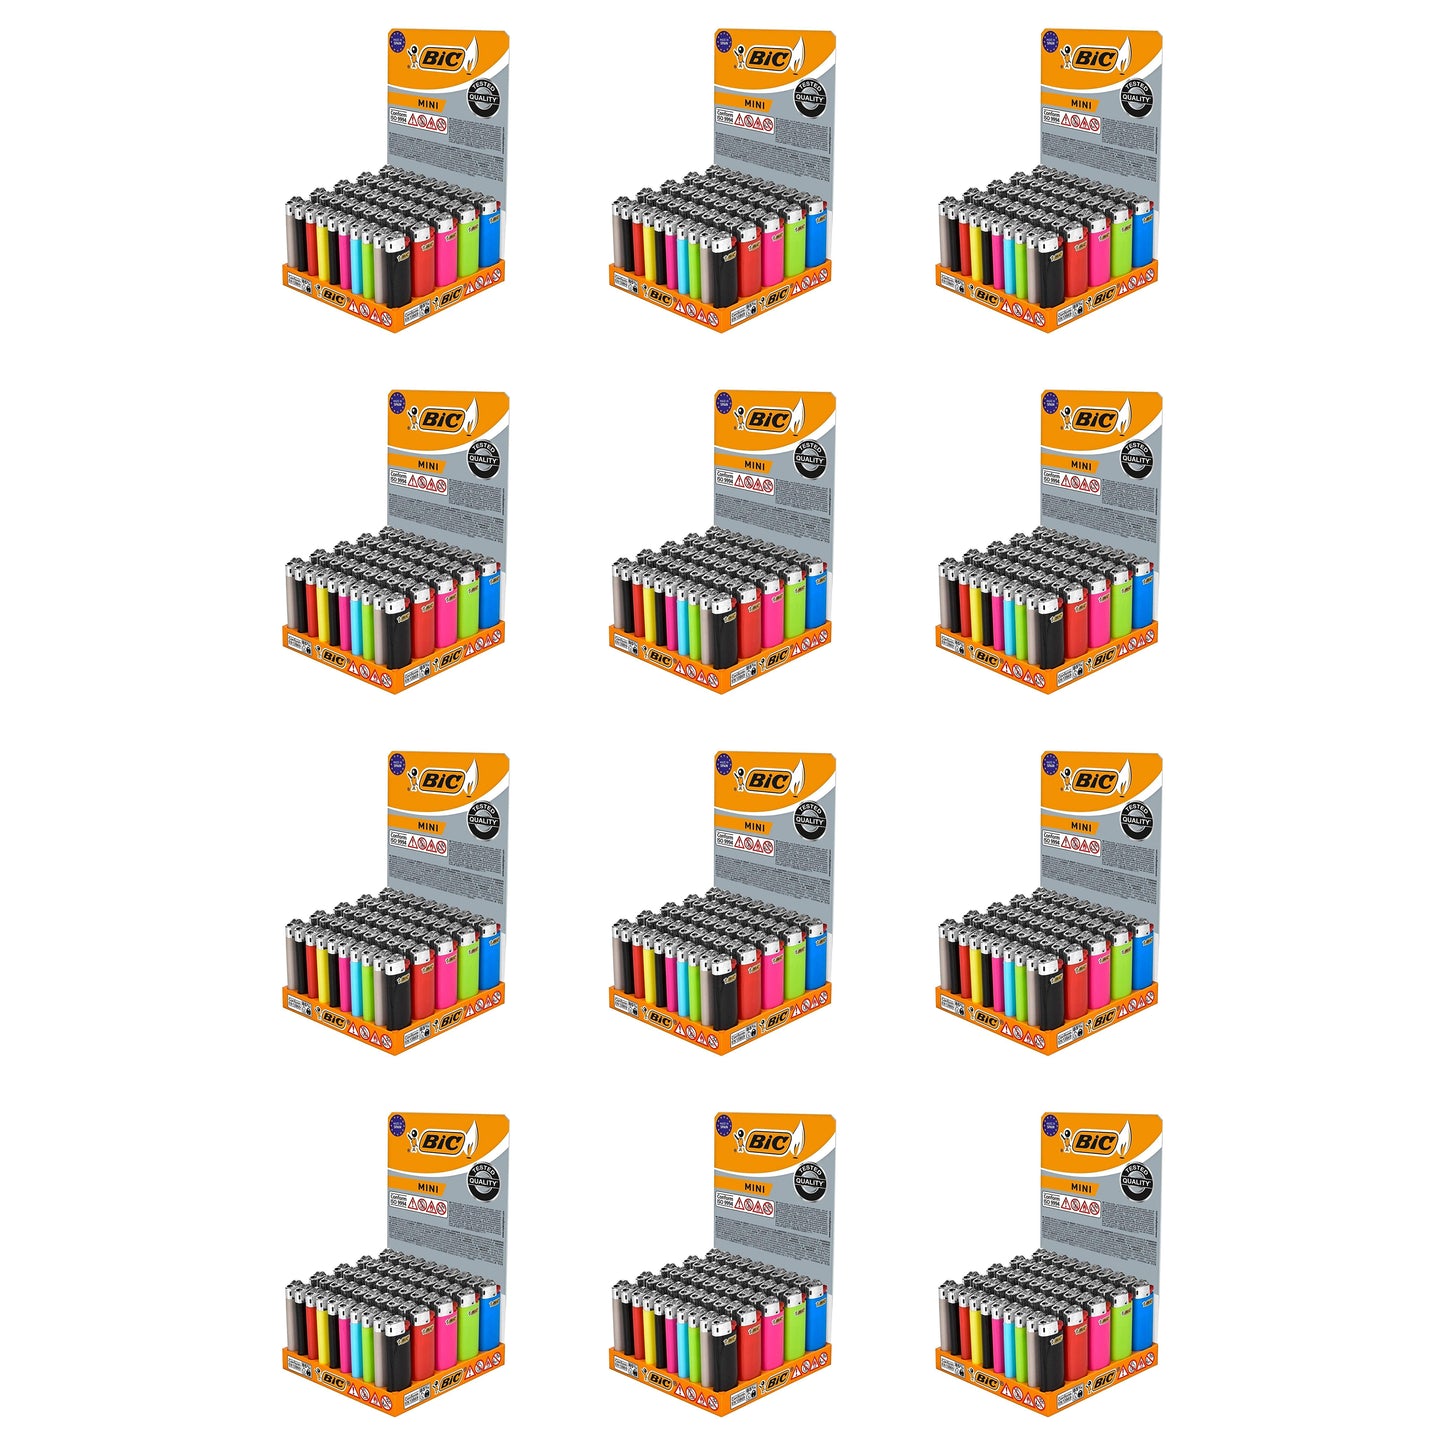 BIC Lighters Mini (Tray of 50) - 12 Boxes